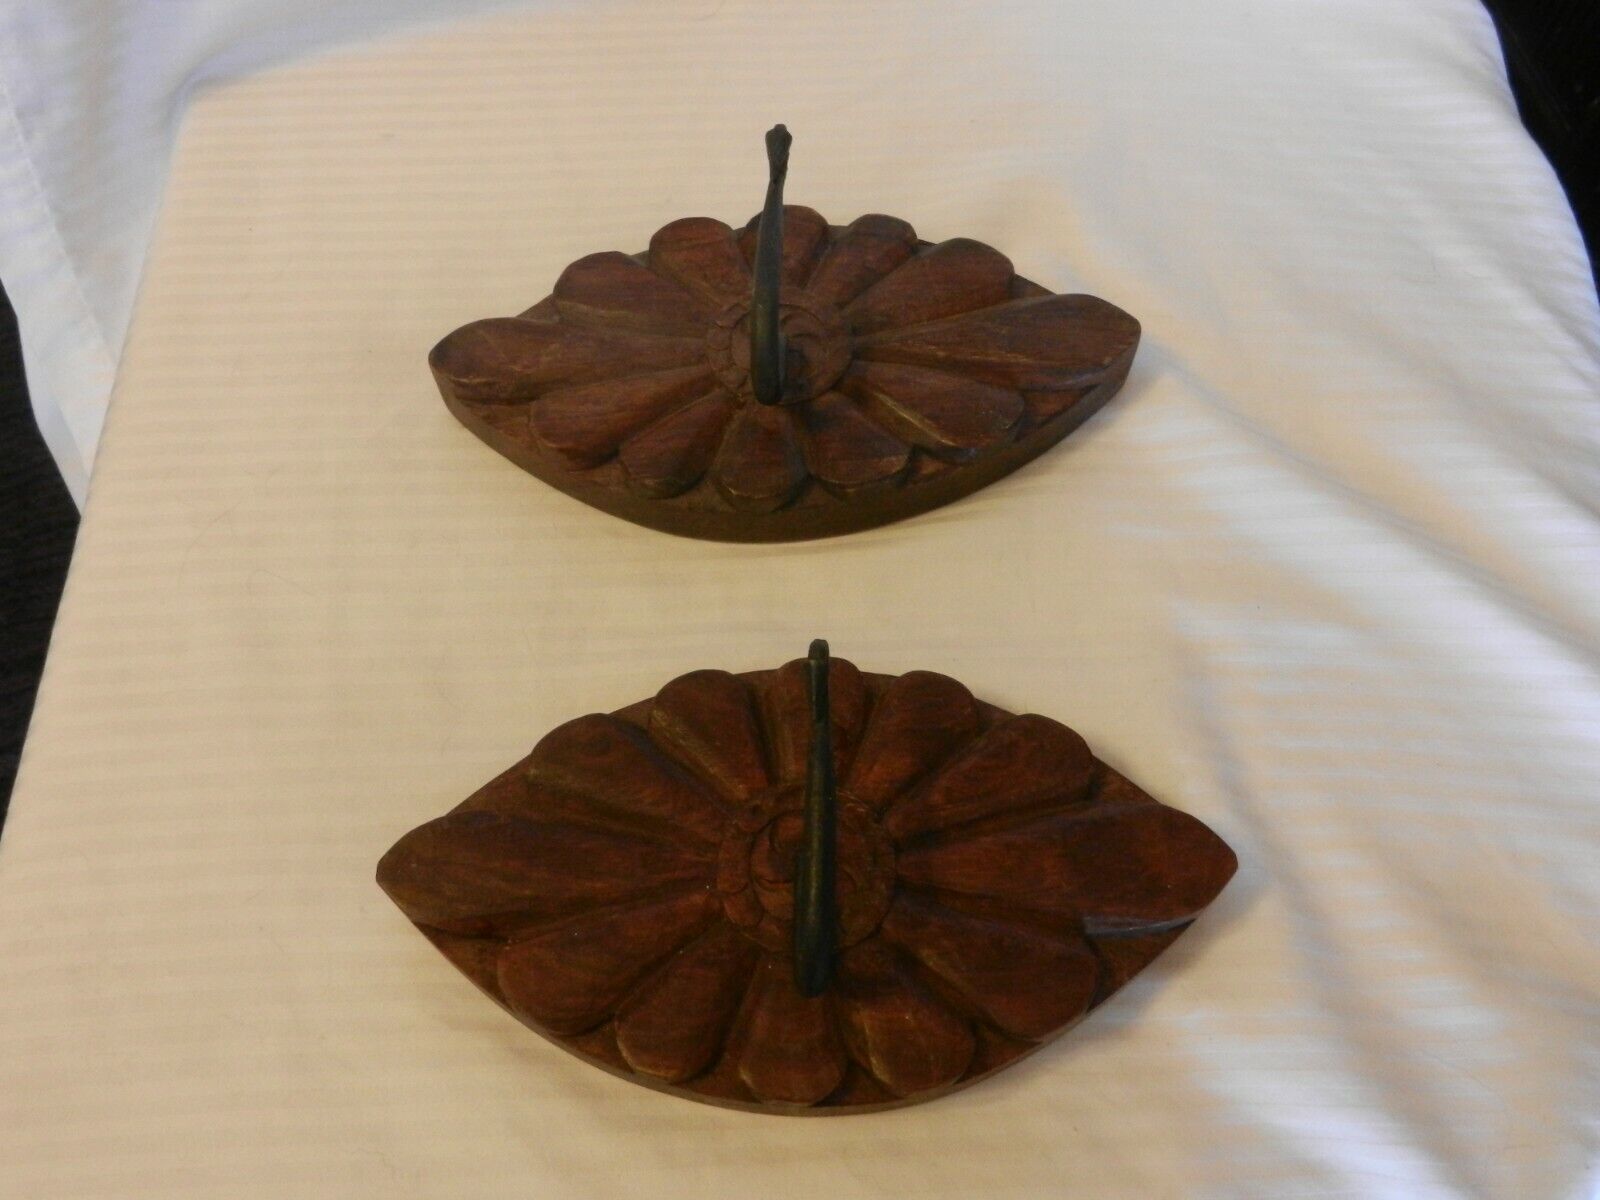 Pair of Brown Wooden Hat Coat Hooks, Wall Mount Flower Design from India